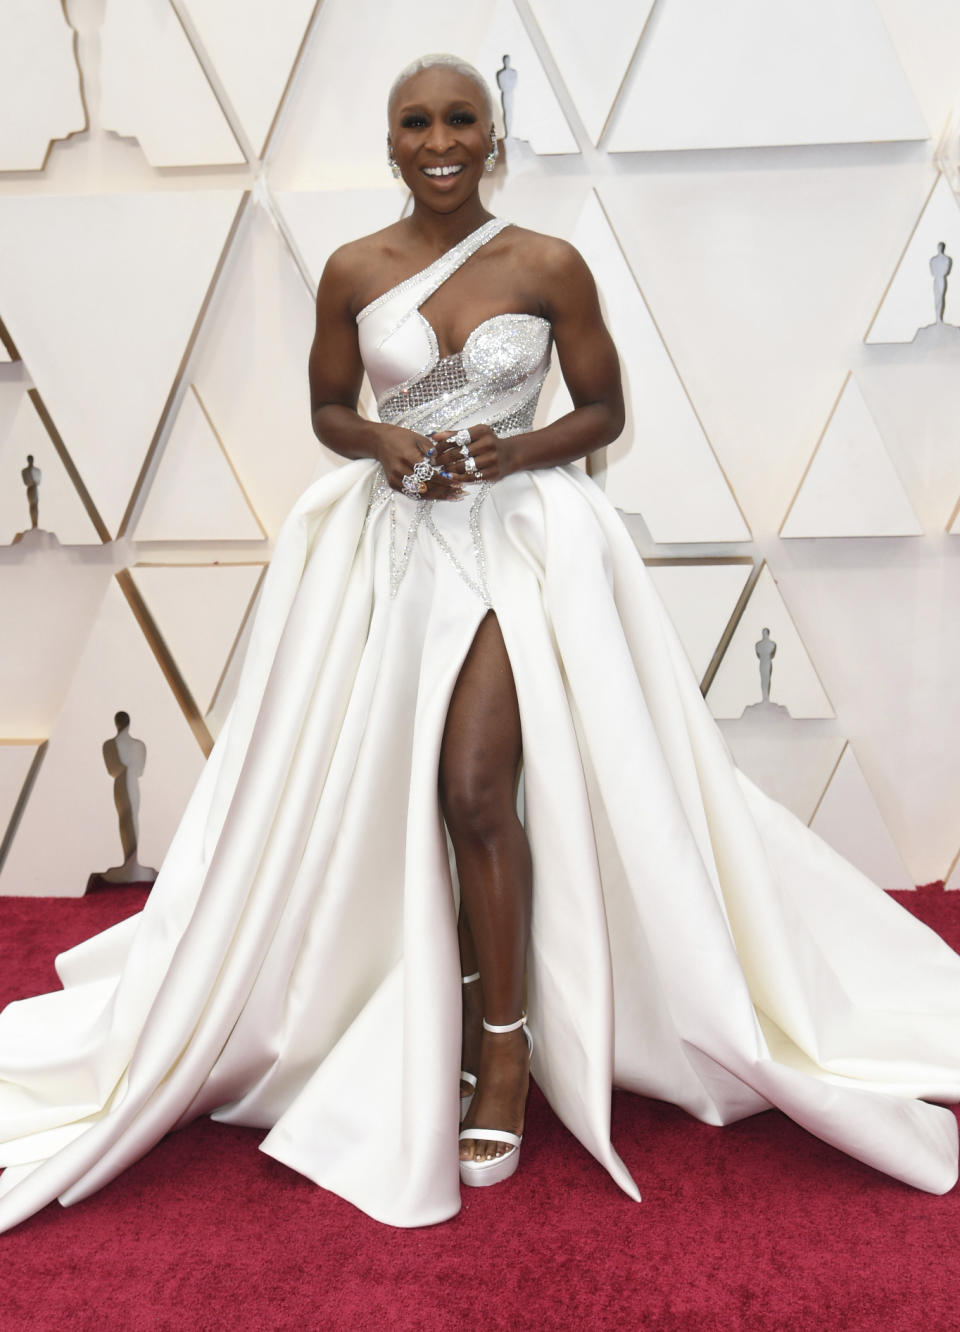 Cynthia Erivo arrives at the Oscars on Sunday, Feb. 9, 2020, at the Dolby Theatre in Los Angeles. (Photo by Richard Shotwell/Invision/AP)